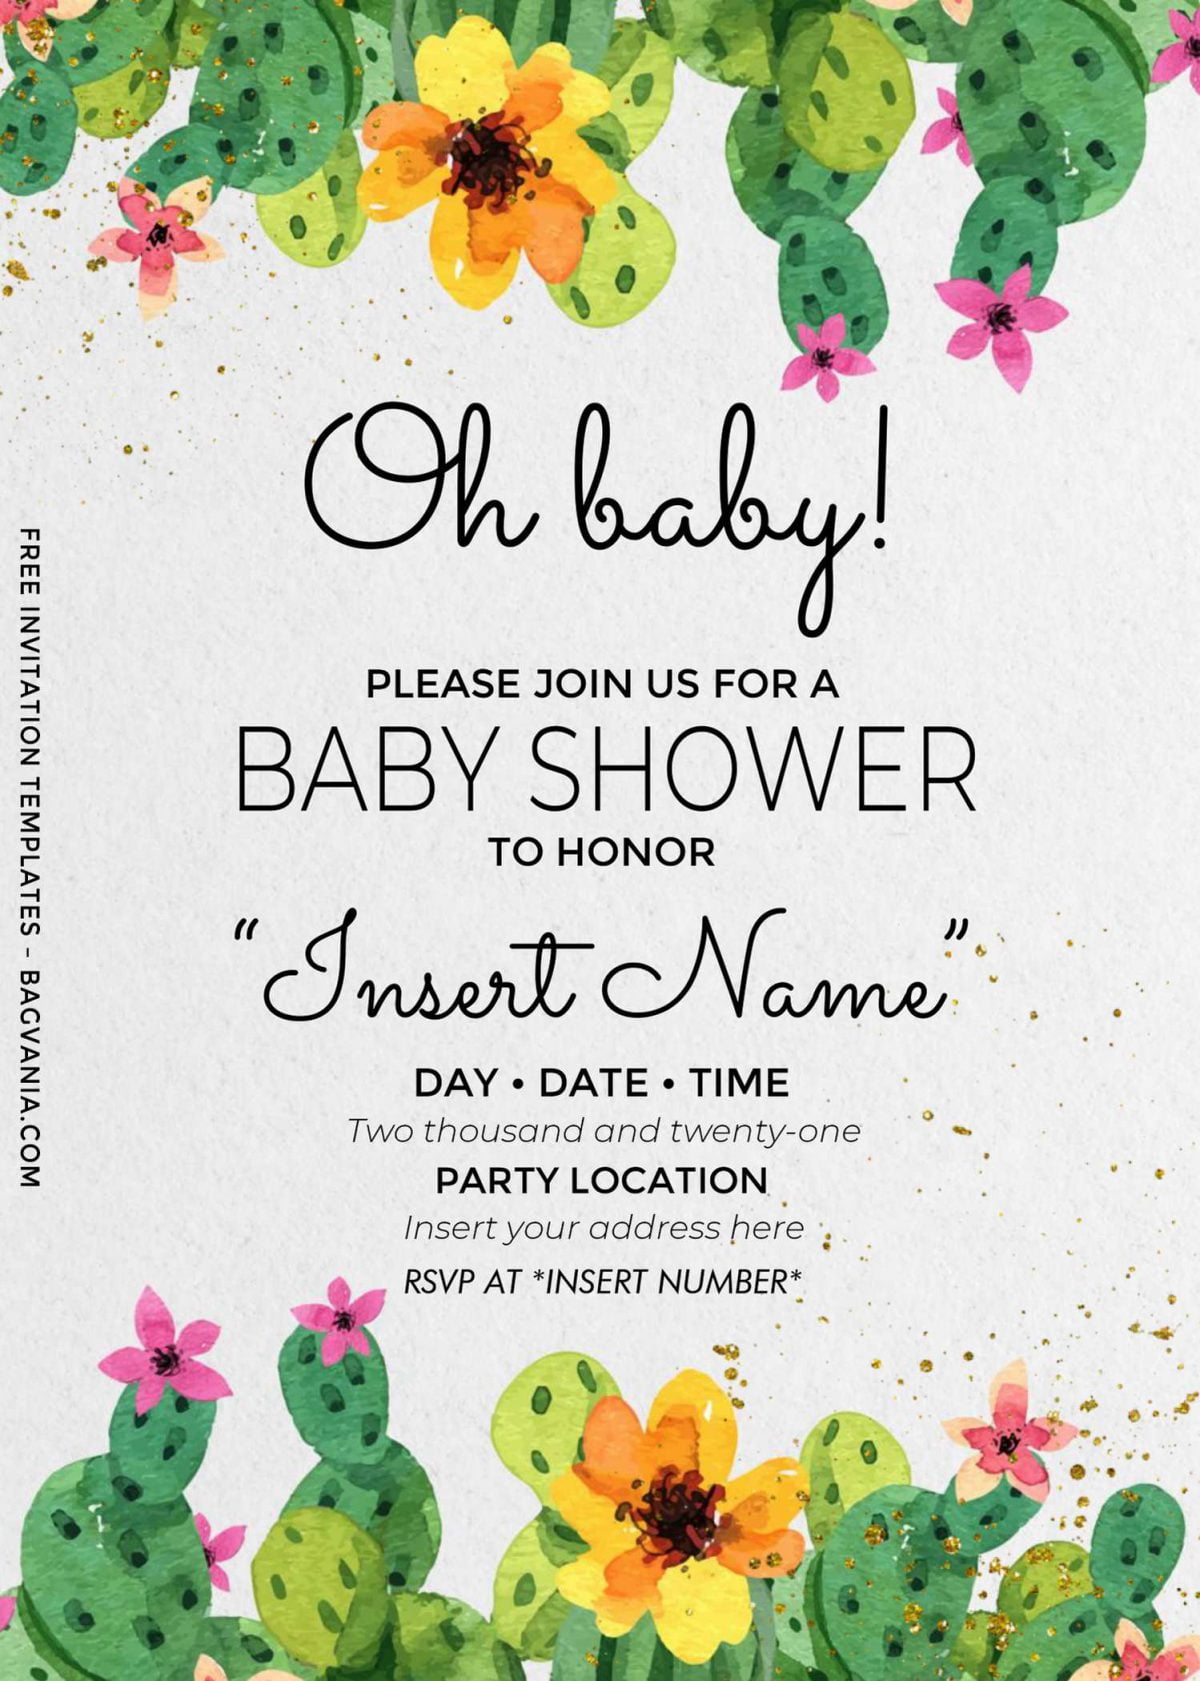 Free Oh Baby Cactus Birthday Invitation Templates For Word and has green little cactus